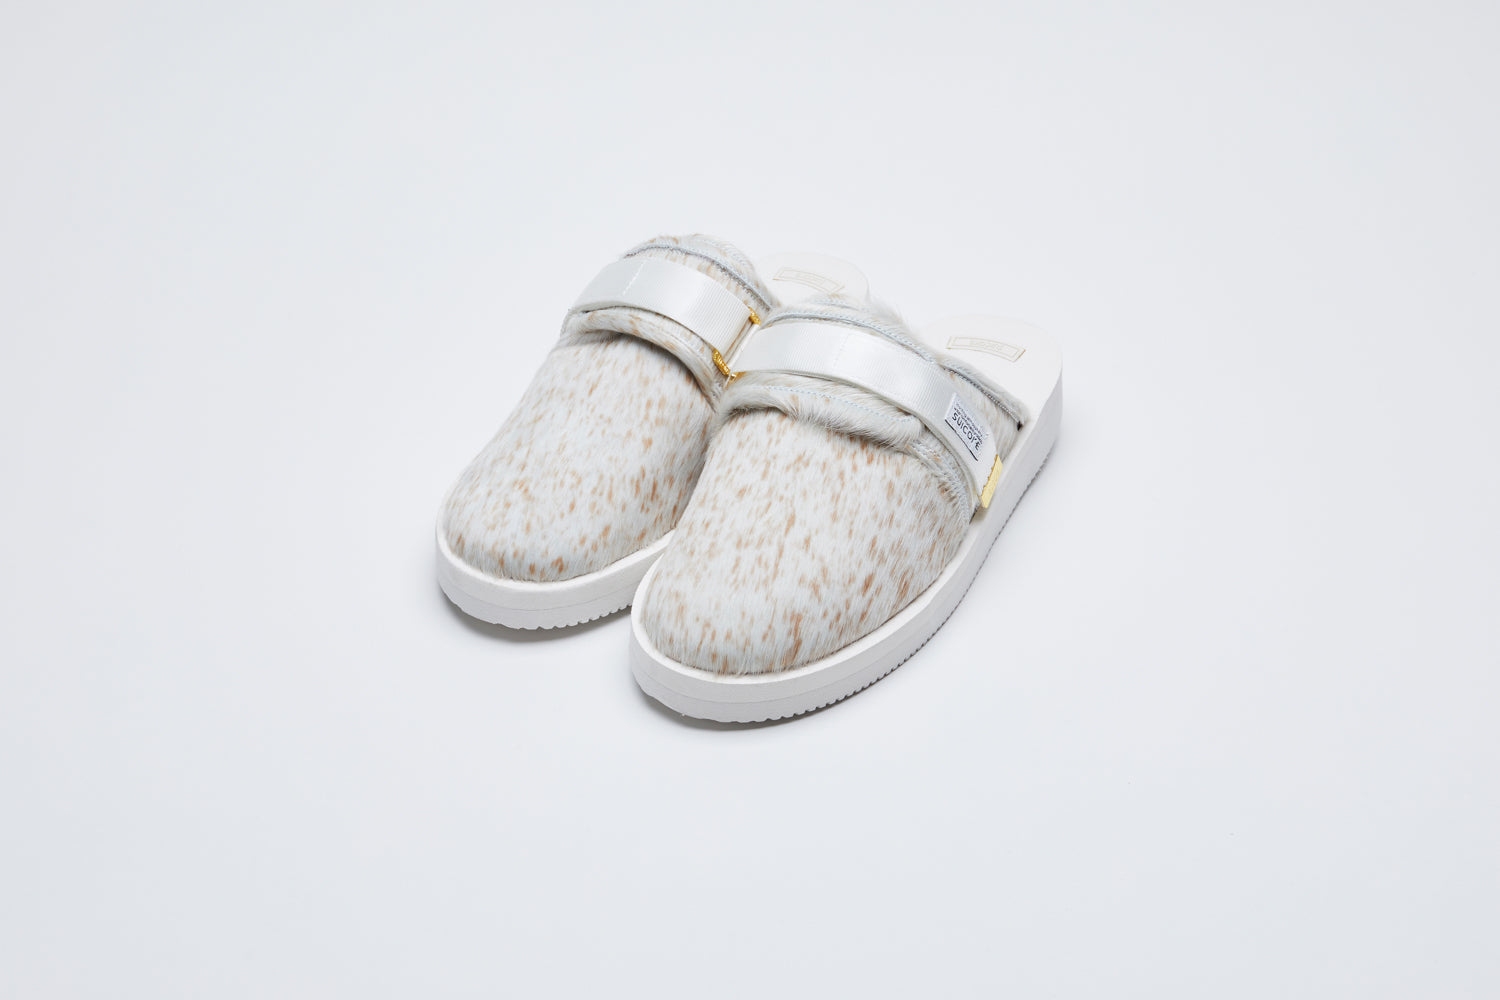 SUICOKE ZAVO-Vhl closed toe slides with white-brown speckled colored calf hair upper, white midsole and sole, nylon straps with logo patch and gold logoed tabs.  From Fall/Winter 2021 collection on SUICOKE Official US & Canada Webstore.